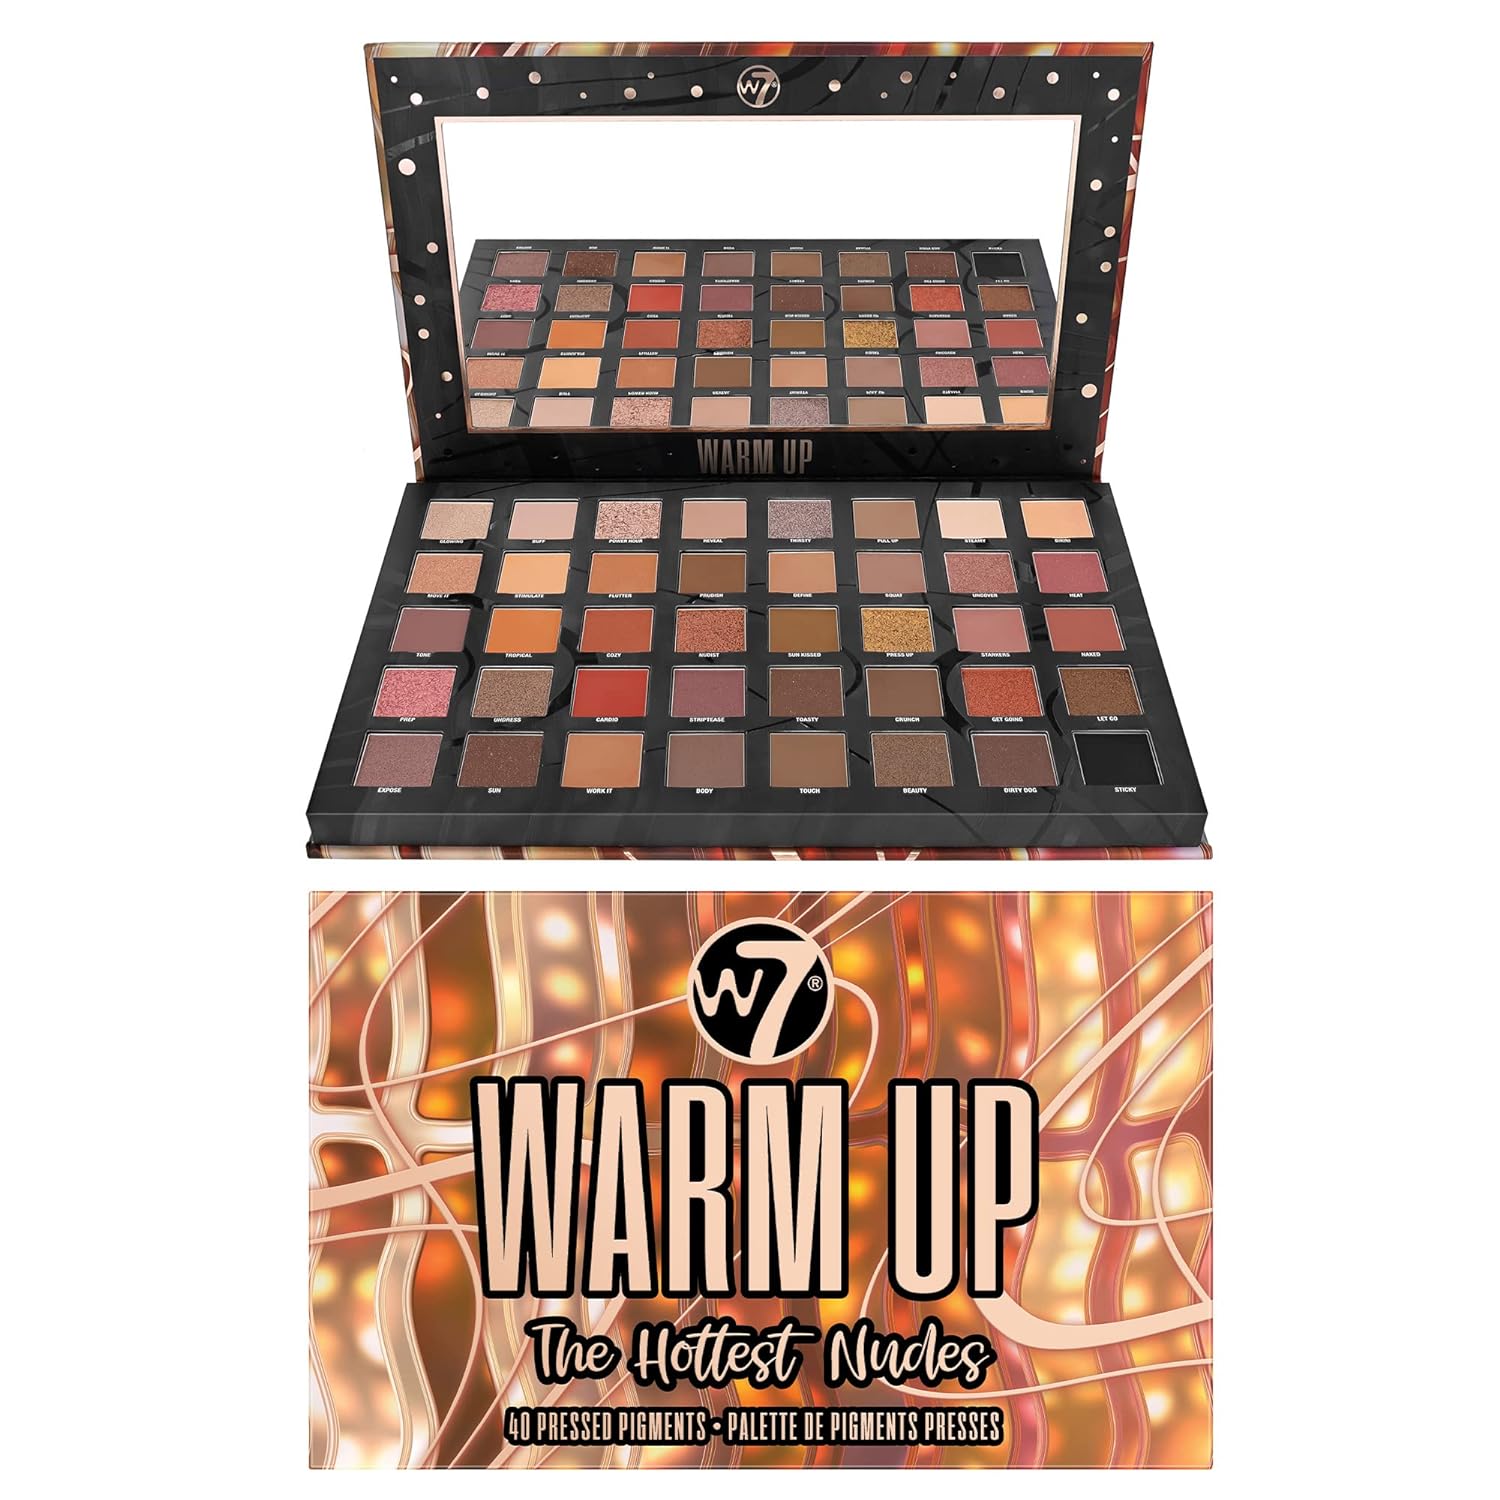 W7 Warm Up Pressed Pigment Palette - 40 High Impact Warm Tone Colors - Flawless Long-Lasting Glam Makeup